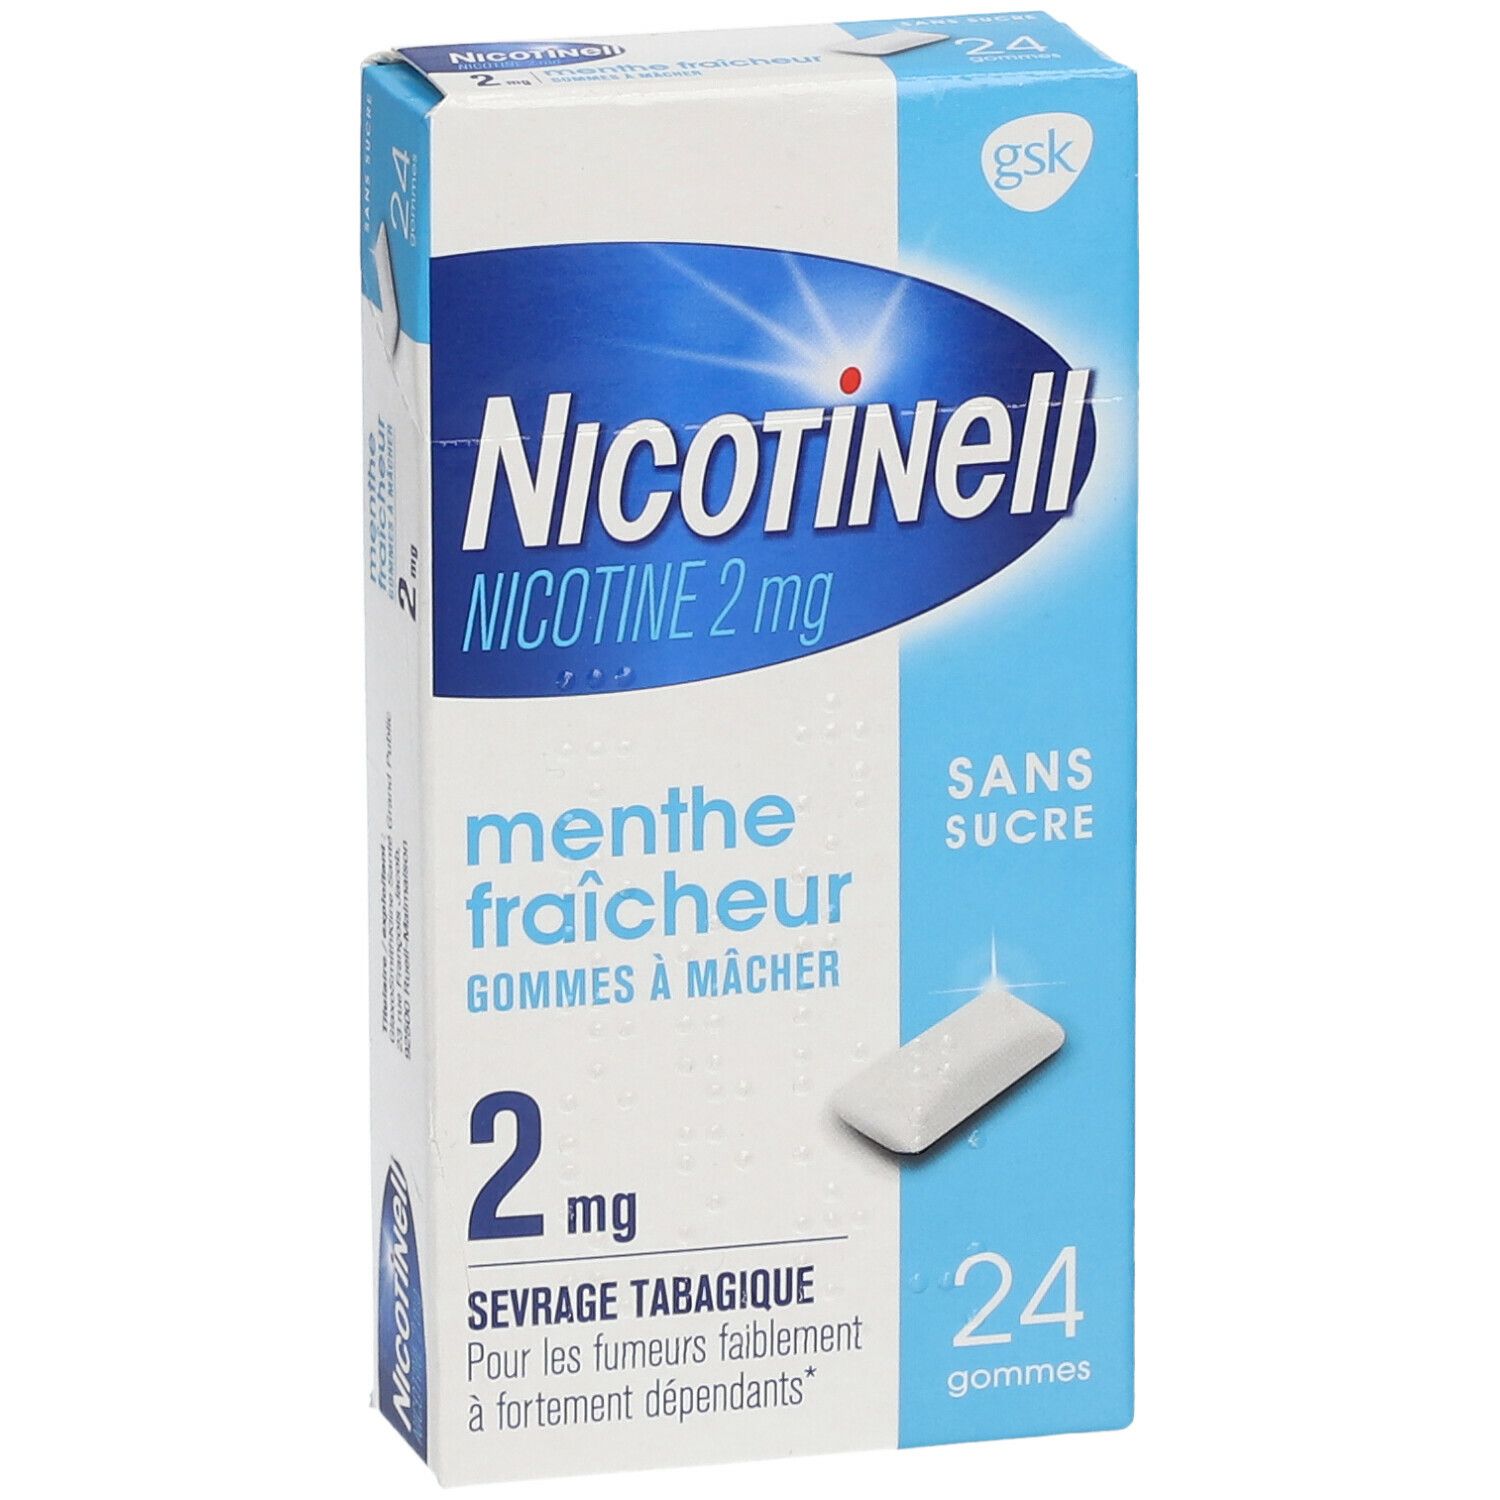 Nicotinell® Menthe fraicheur s/s 2 mg